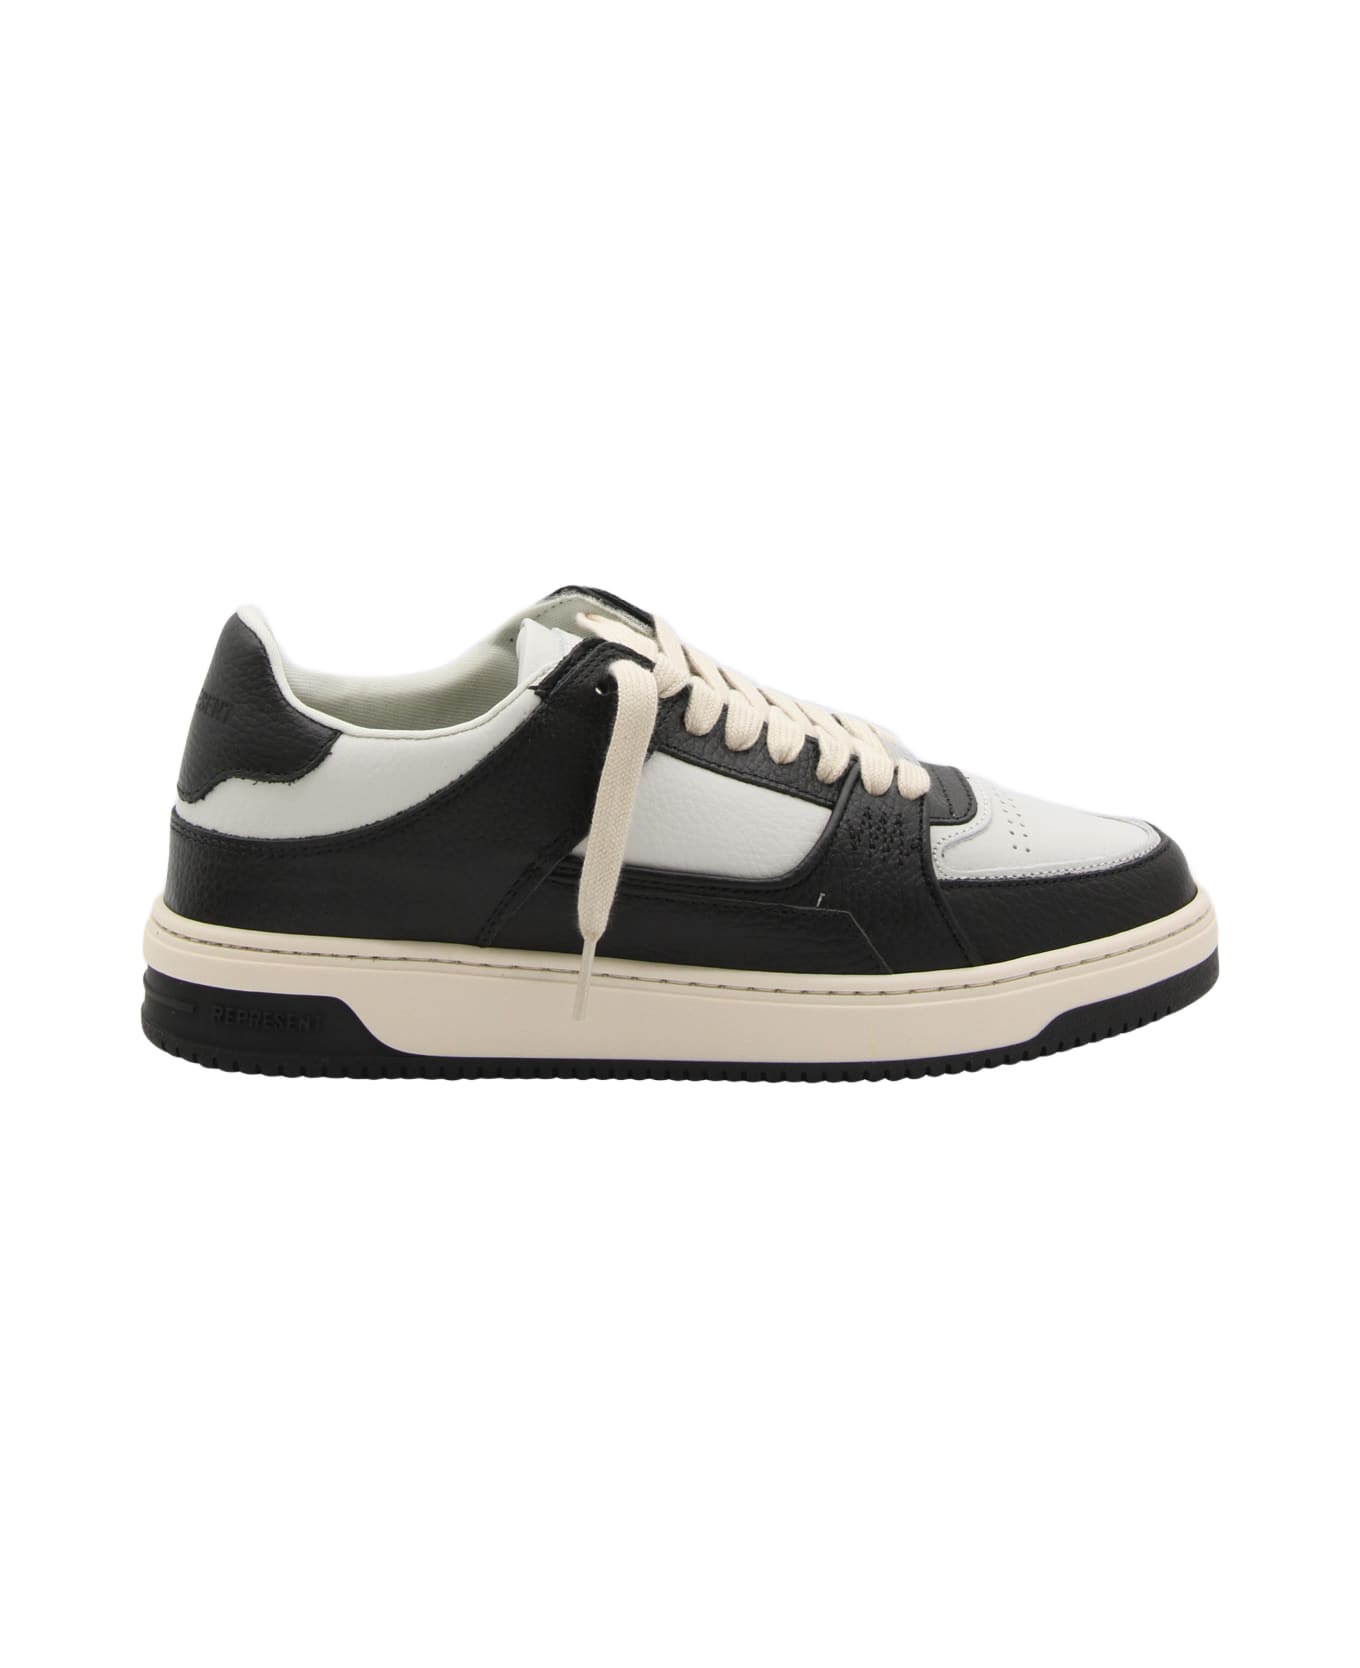 REPRESENT White And Black Leather Apex Sneakers - White スニーカー